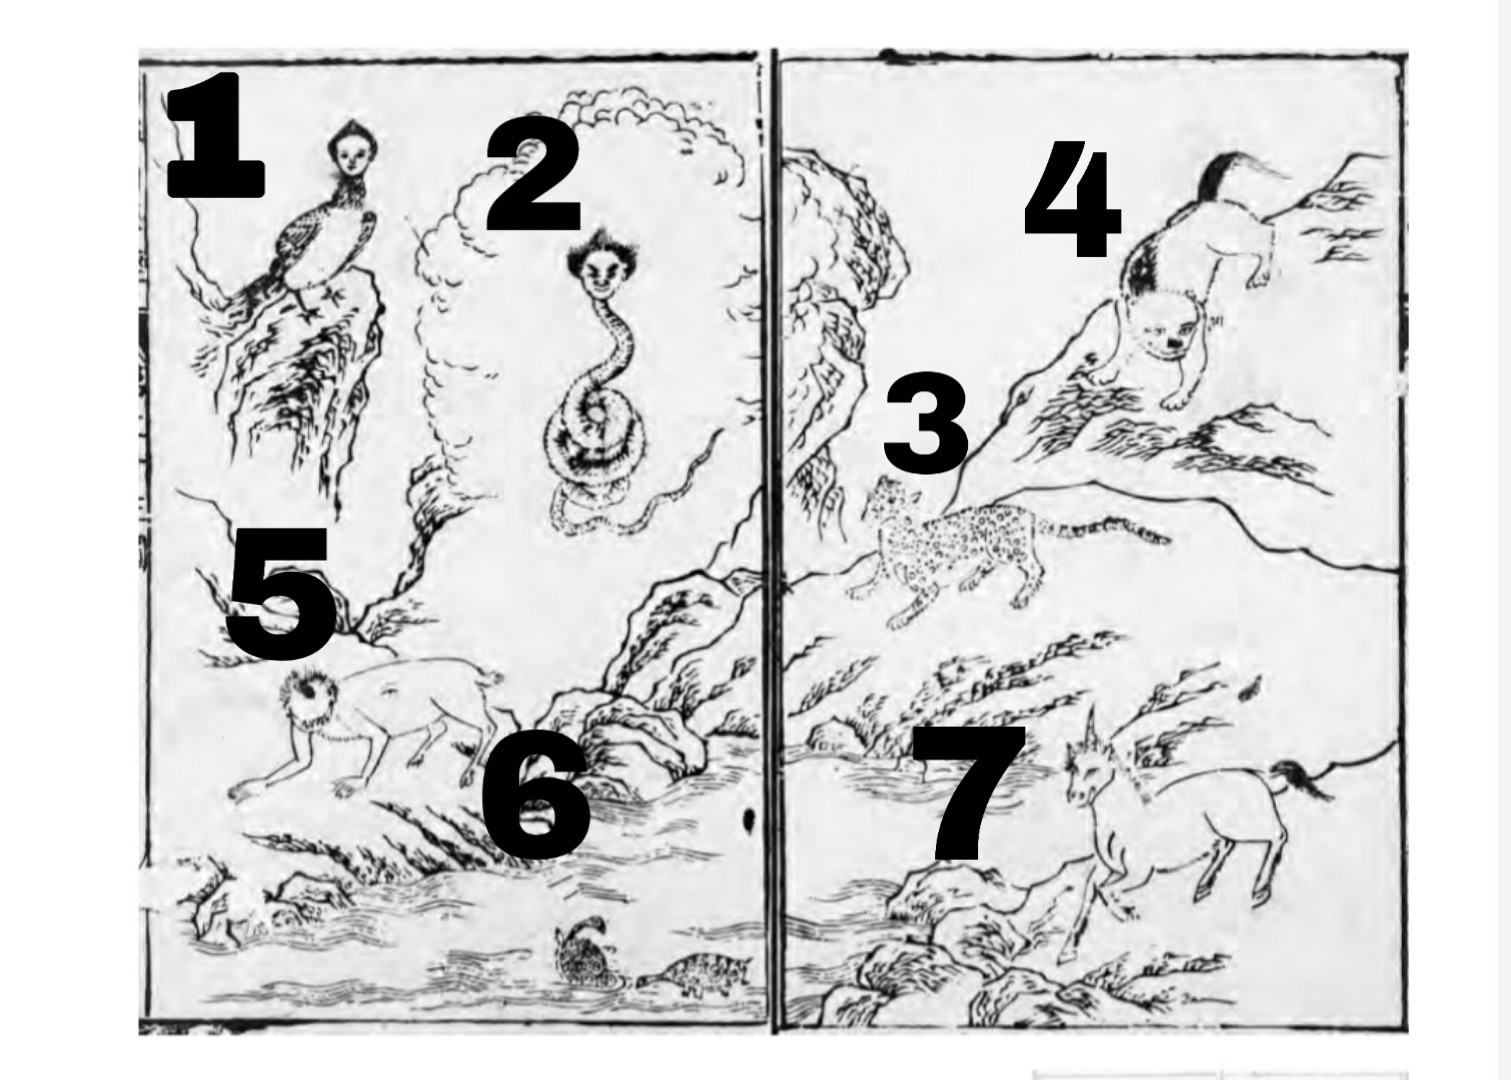 Black and white line drawing, placing seven strange creatures in a rocky landscape with a river or pool at the bottom. 1: bird with head of a female human; 2, snake with human head; 3, leopard like creature; 4 creature like a dog but with a bear-like head and wolf-like tail. 5, creature with front paws like a monkey and hooves on its hind paws. 6 a creature like a turtle in the water; 7, a horse with a horn on its head.